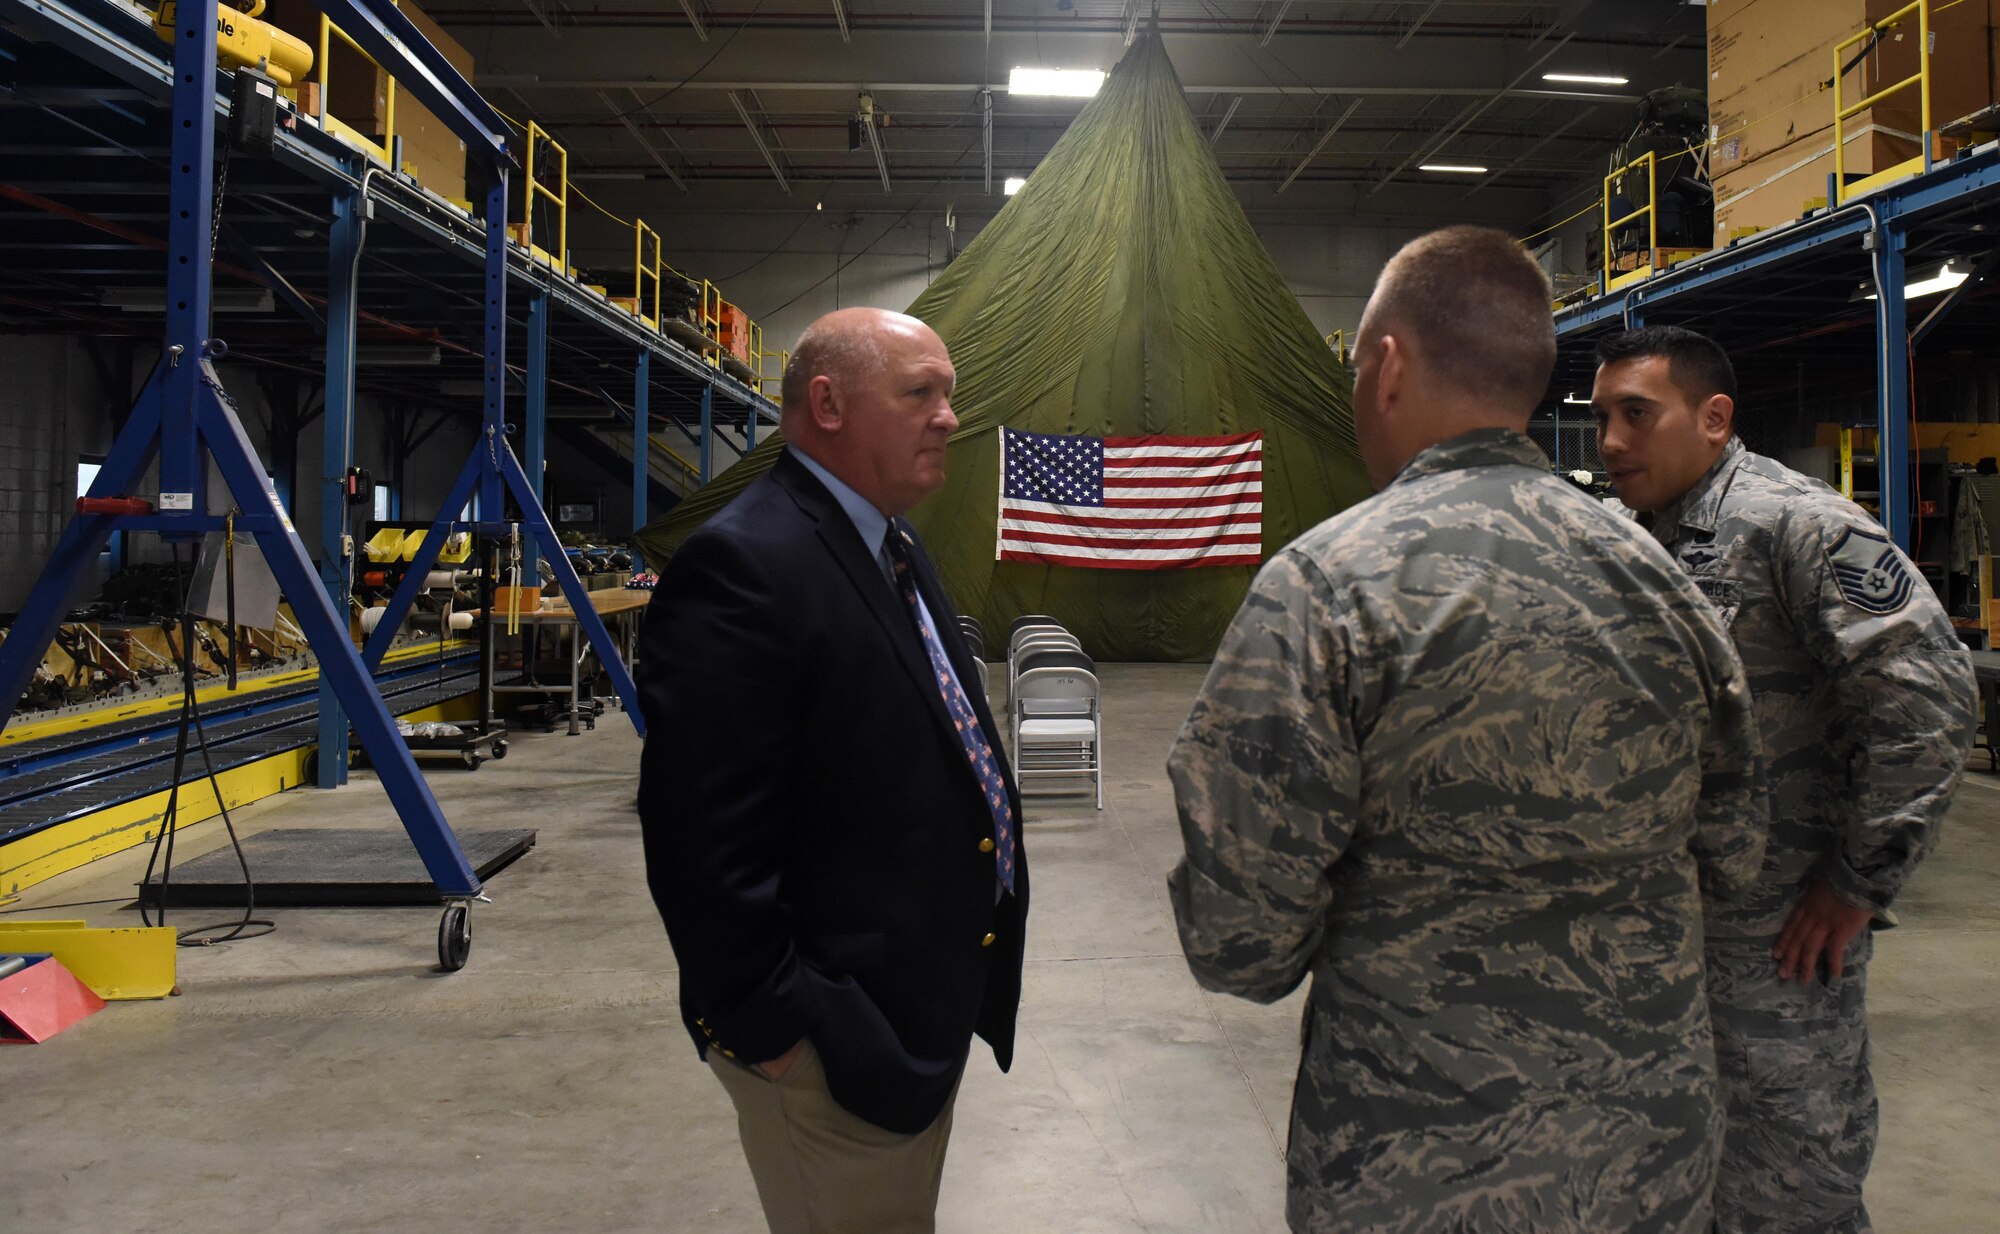 U.S. Rep. Glenn Thompson, R-Pa., toured the 193rd Special Operations Wing, Middletown, Pennsylvania, May 20. Capt. Thomas Bagnell (center), installation deployment officer, and Master Sgt. Brian Sommers (right), air transportation specialist, both with the 193rd SOW, explain the various activities that go on inside the aerial port, to include preparing and securing cargo for airdrops. (U.S. Air National Guard photo by Senior Airman Julia Sorber/Released)